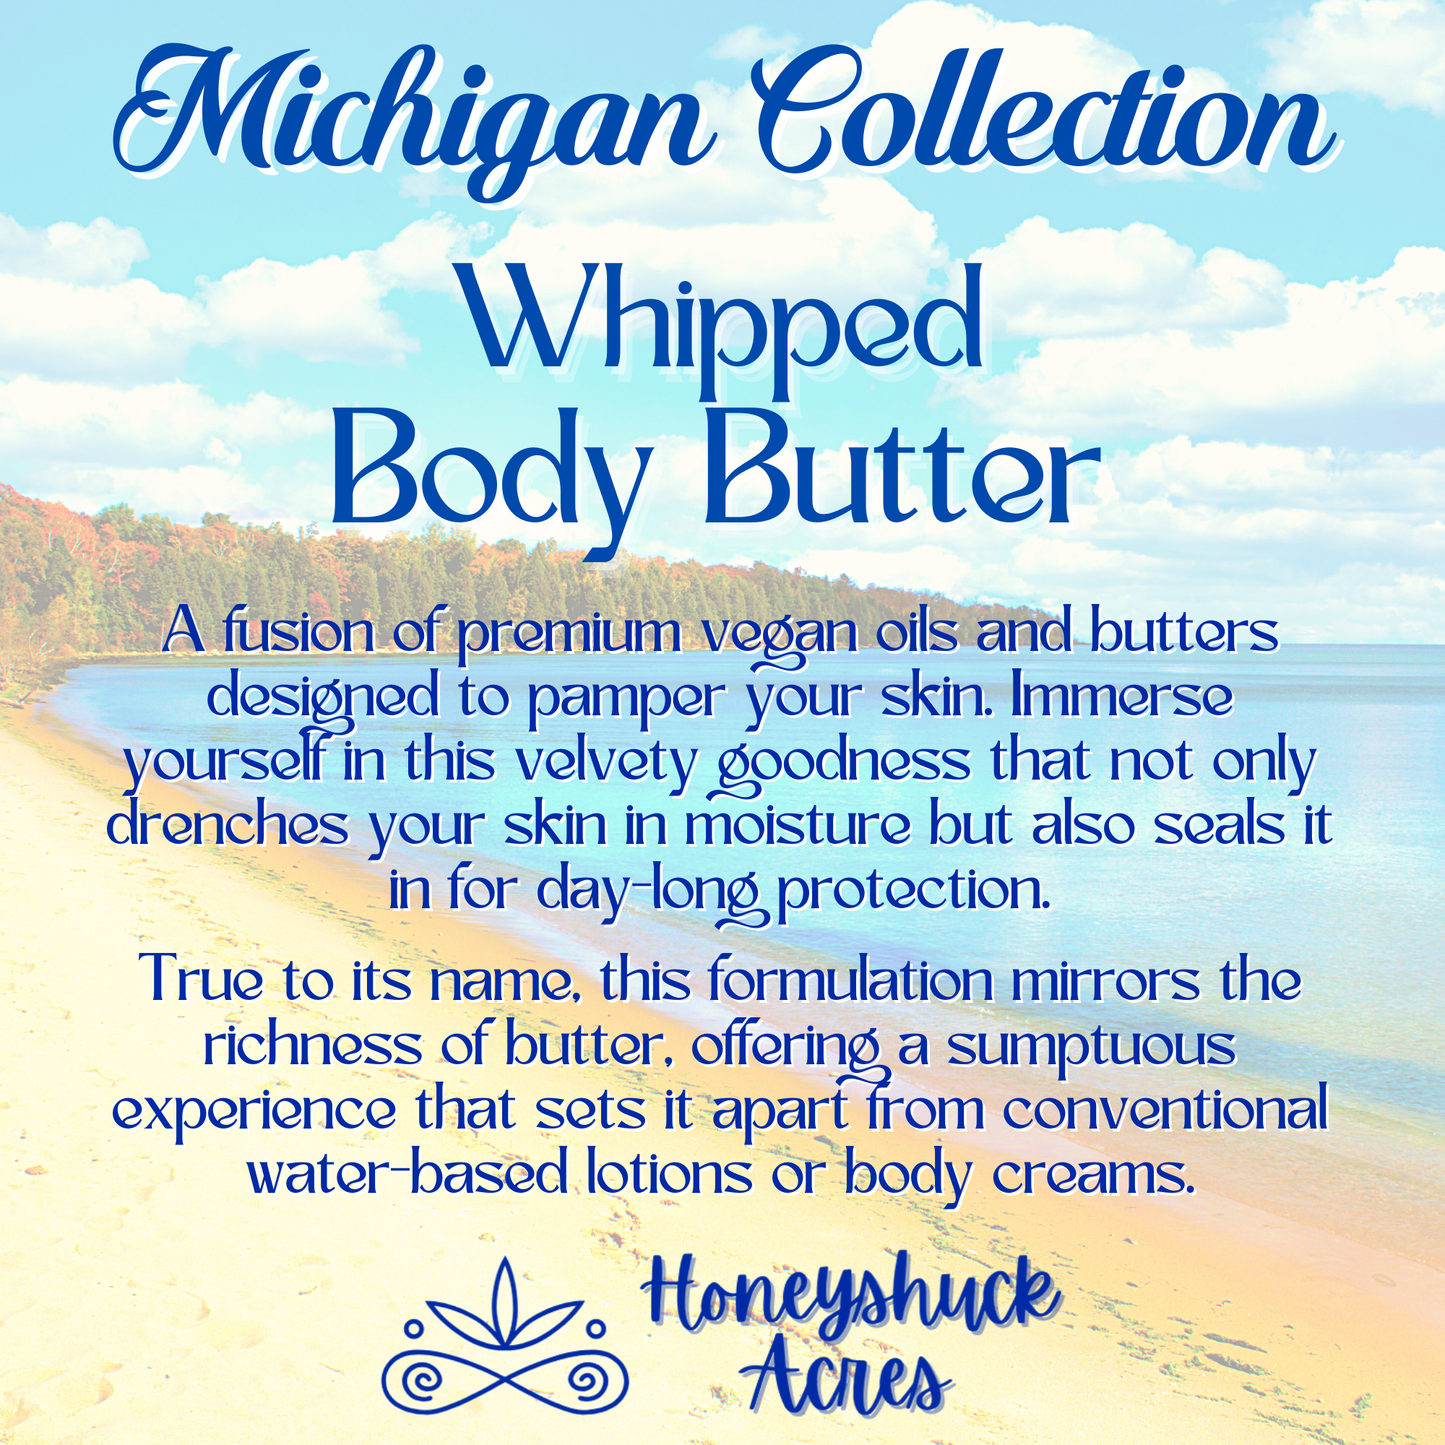 Michigan Whipped Body Butter | Kitch-iti-kipi Inspired Scent | Choice of Size